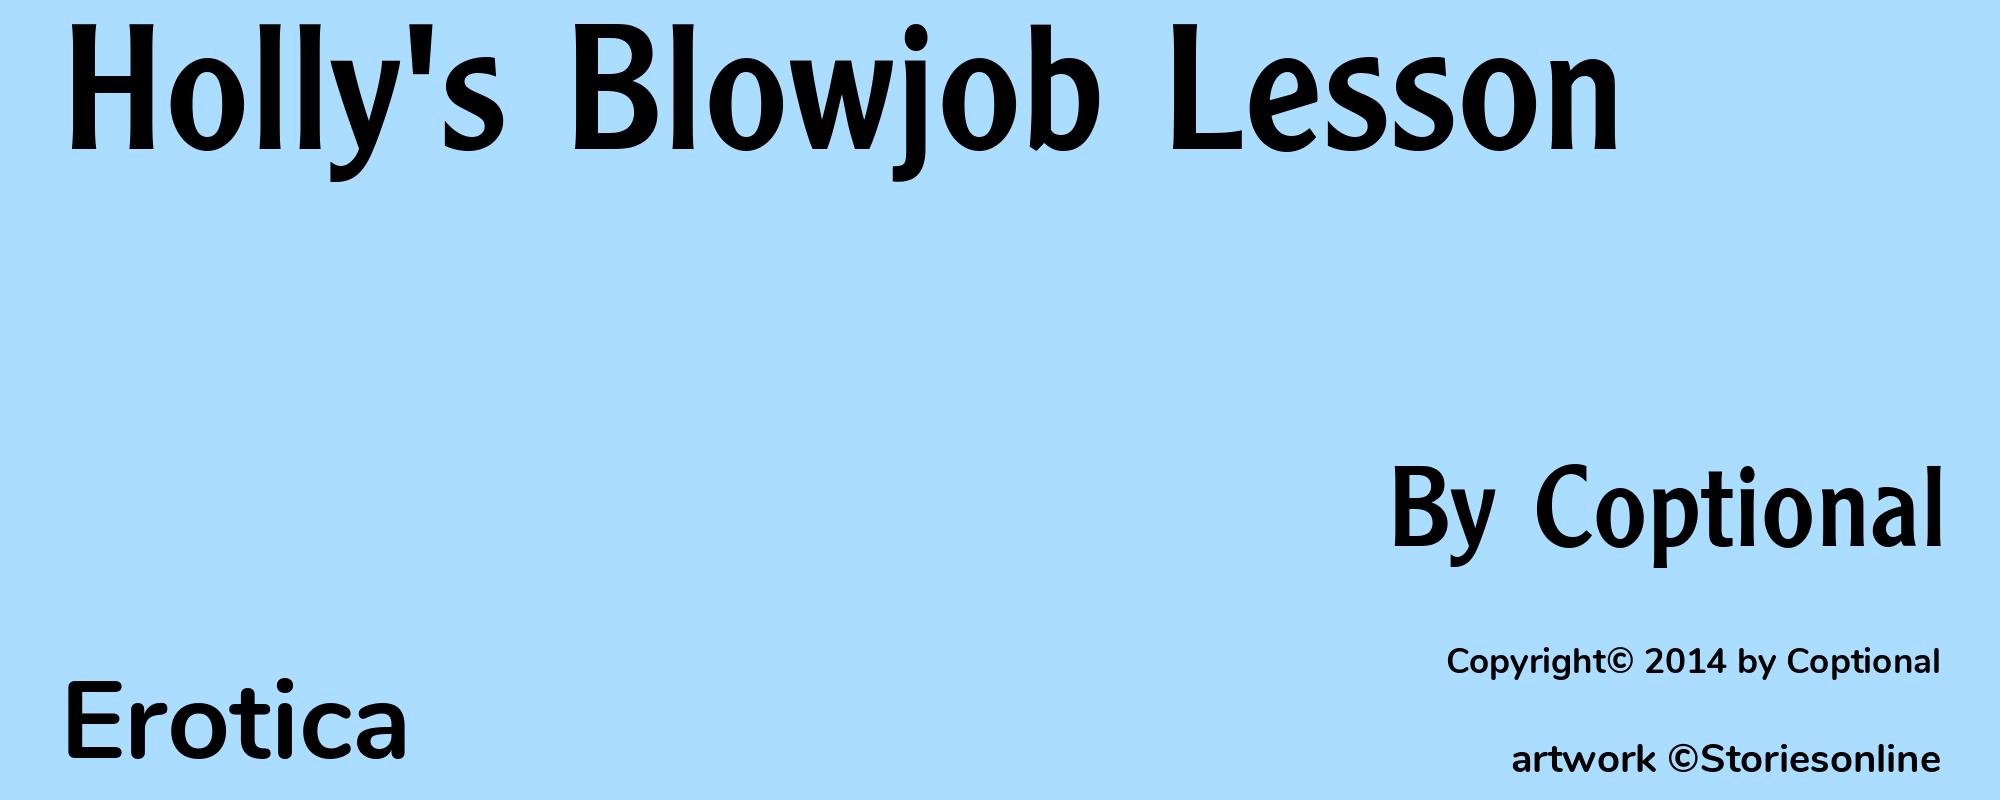 Holly's Blowjob Lesson - Cover